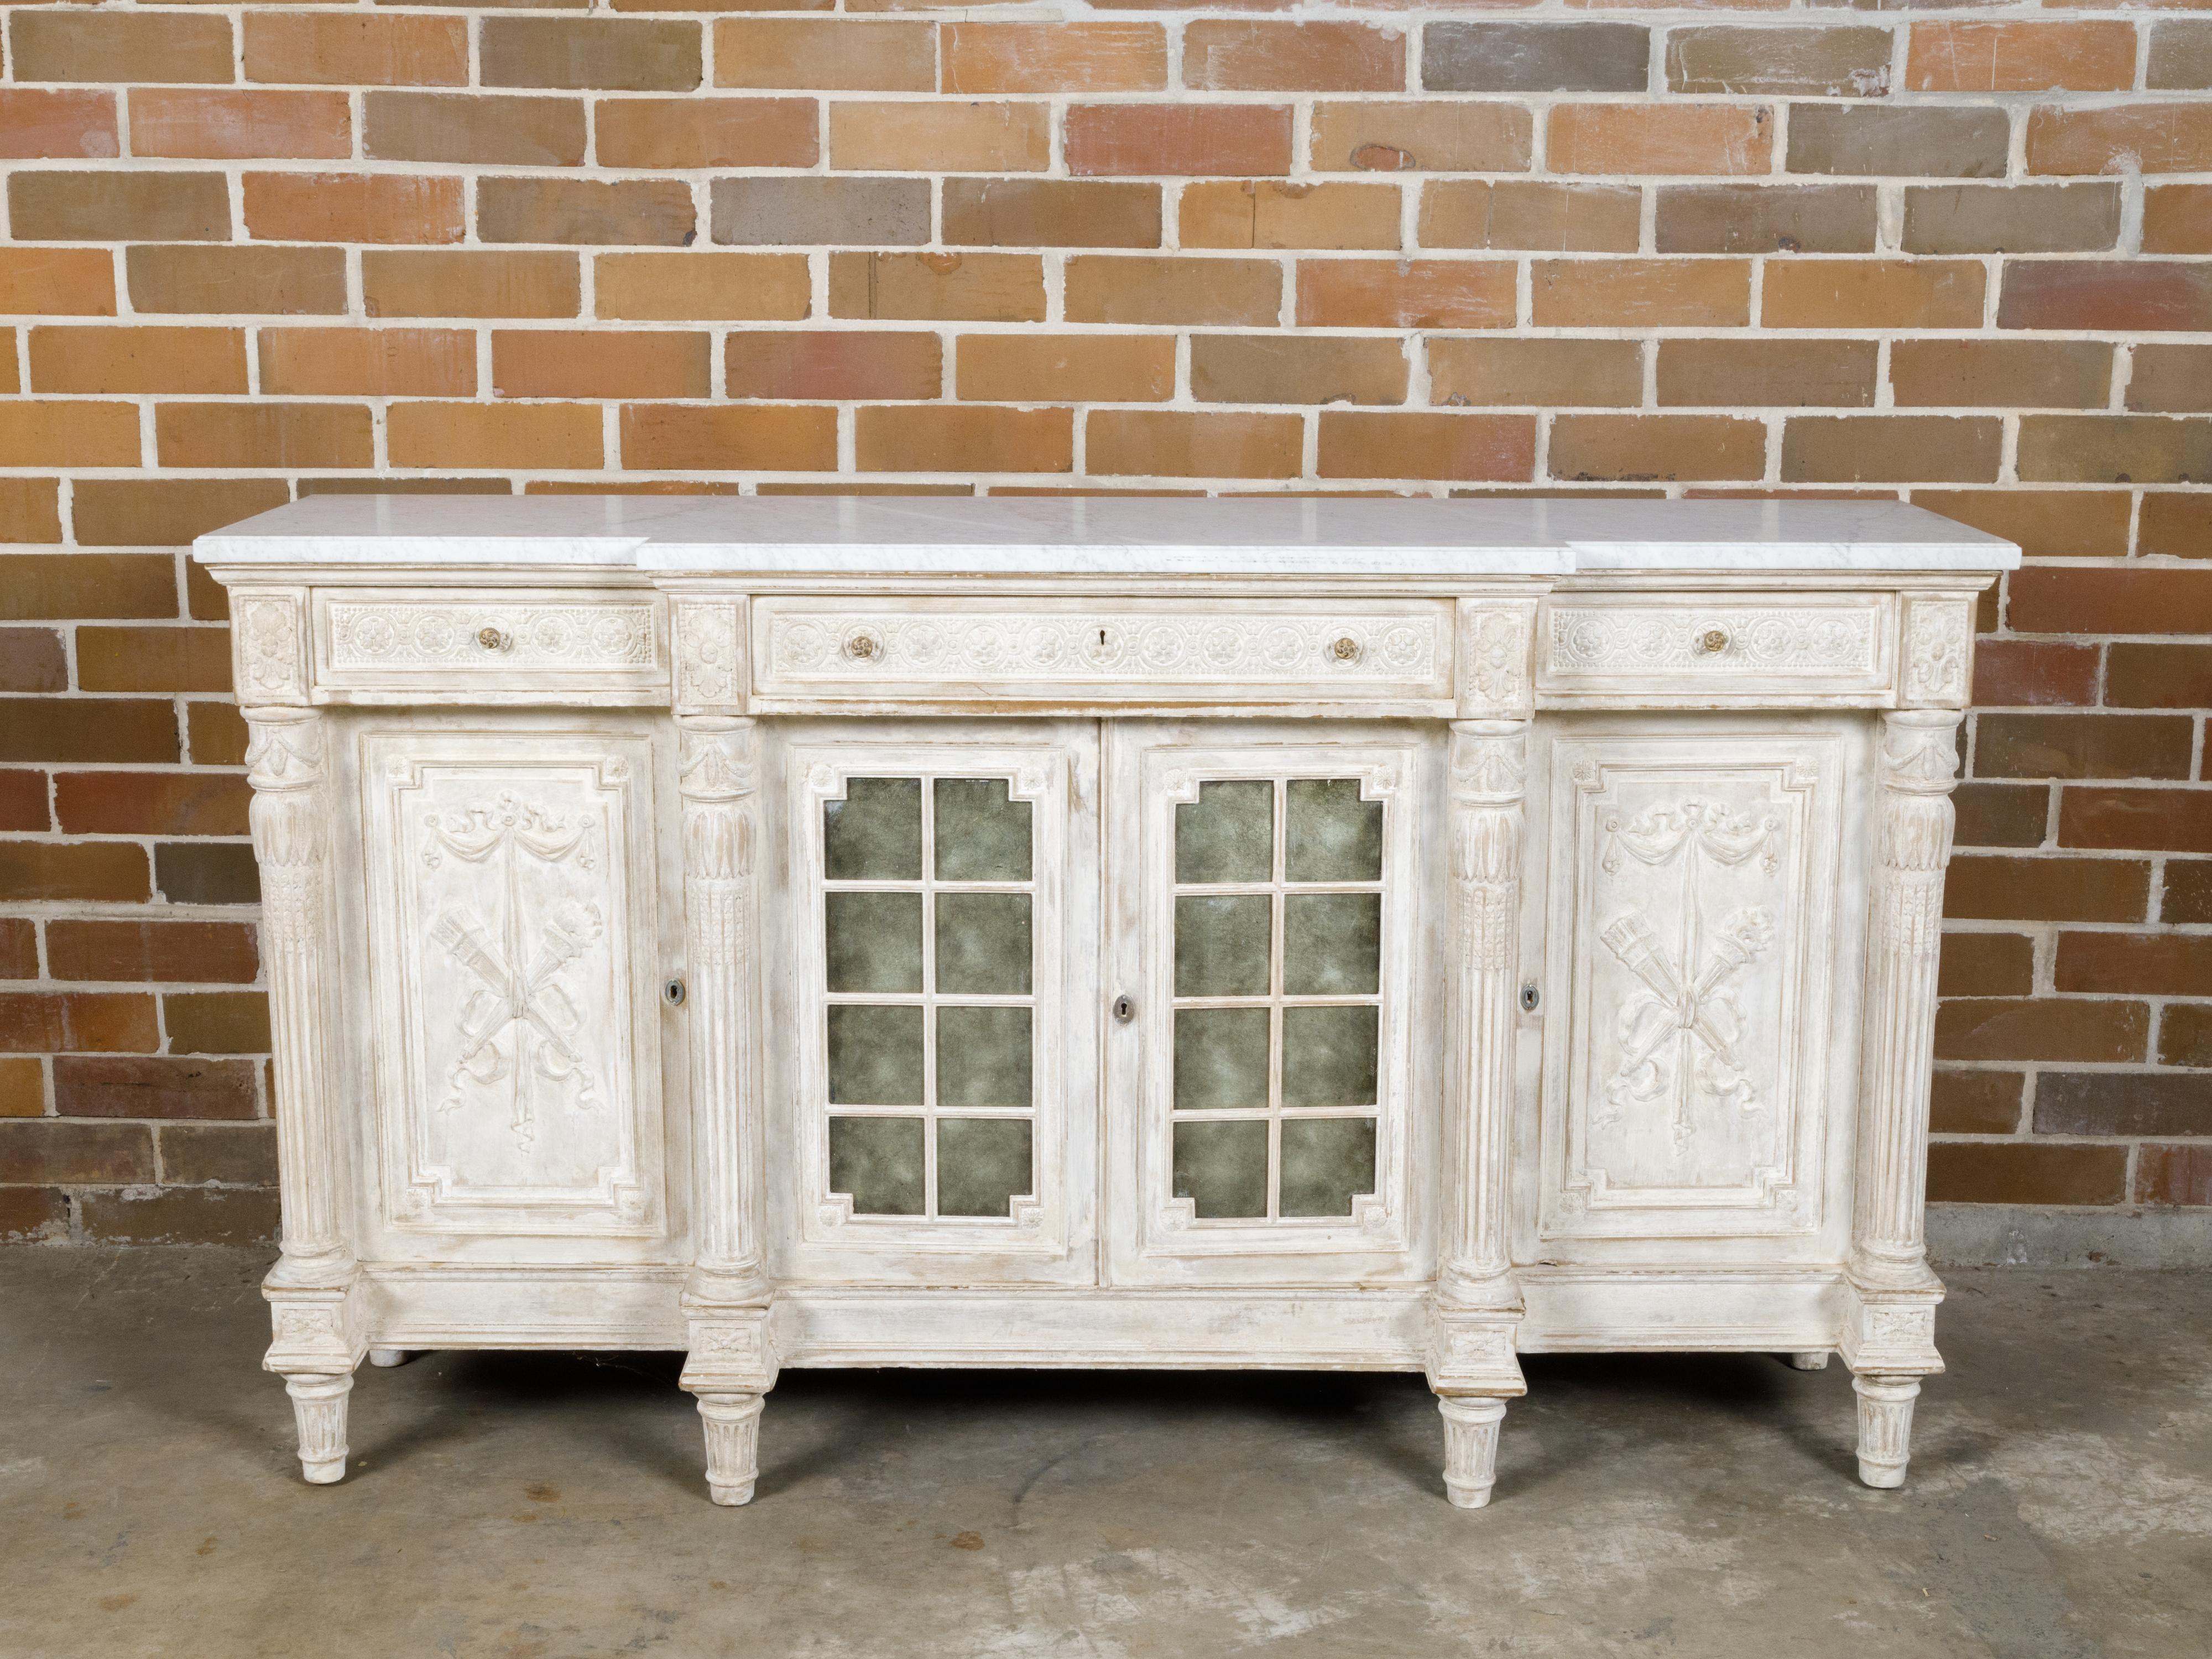 A French Neoclassical style painted and carved wooden breakfront buffet from the 19th century with white marble top, three drawers over three doors. This 19th-century French Neoclassical style buffet effortlessly combines artistry with